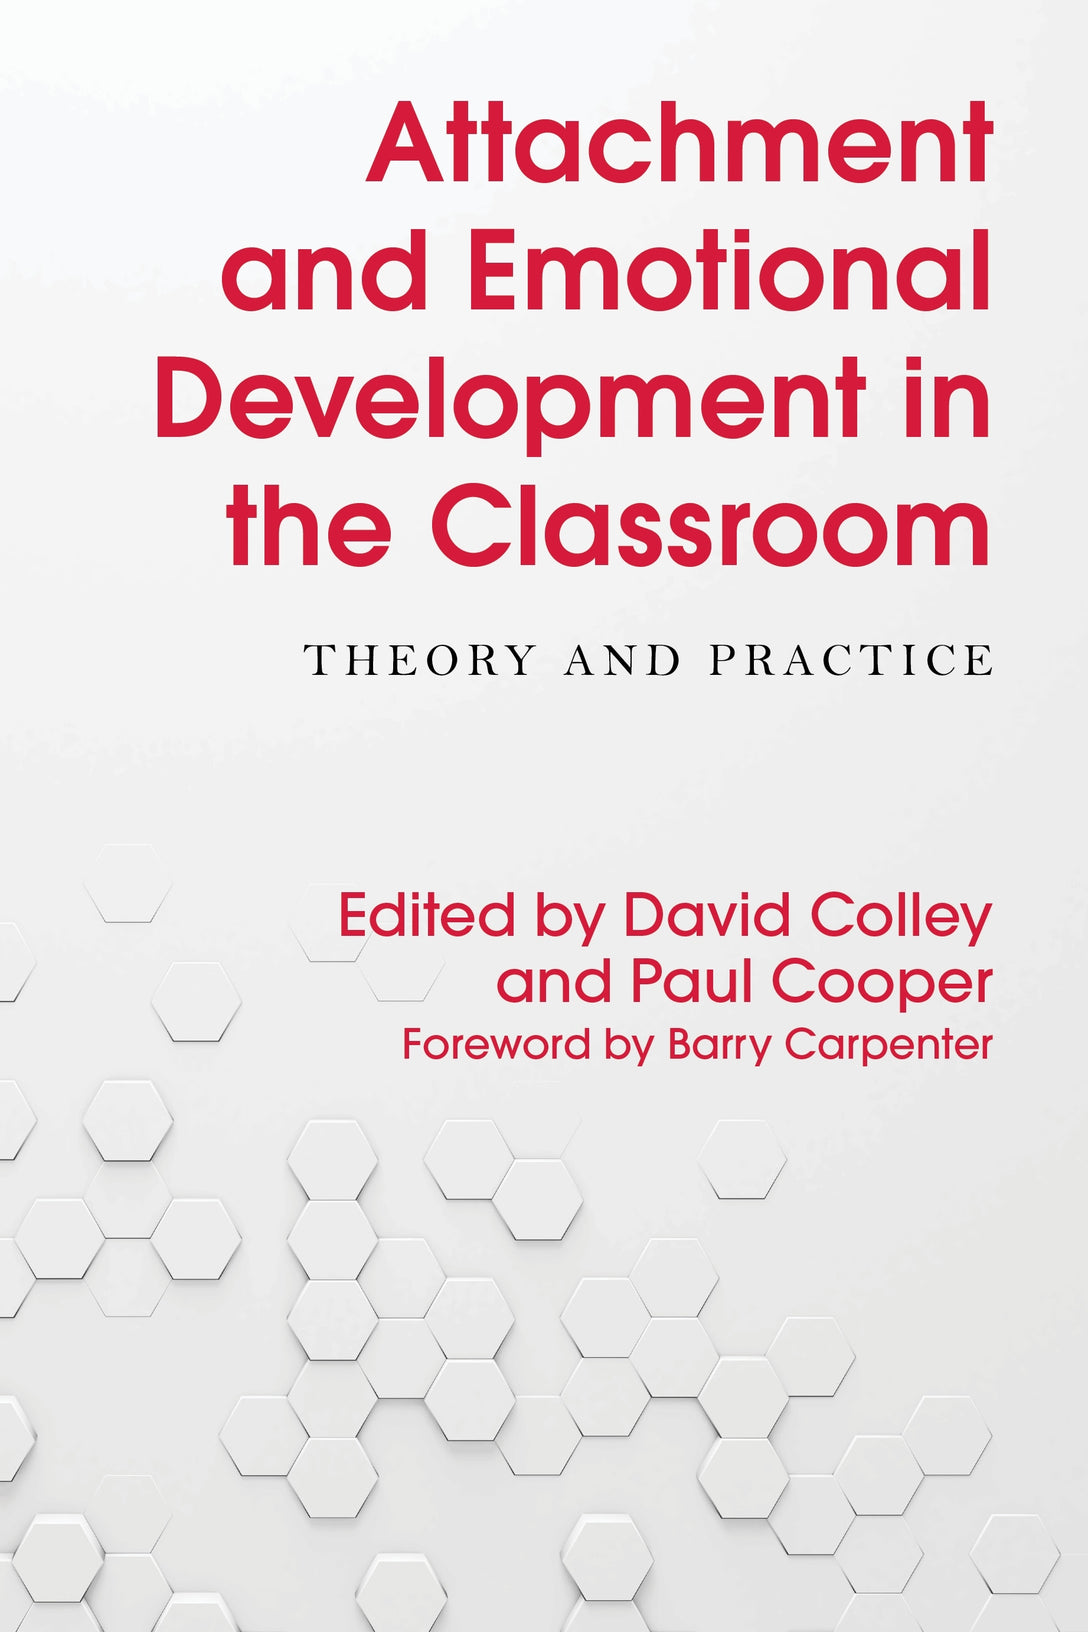 Attachment and Emotional Development in the Classroom by Barry Carpenter, David Colley, Paul Cooper, No Author Listed